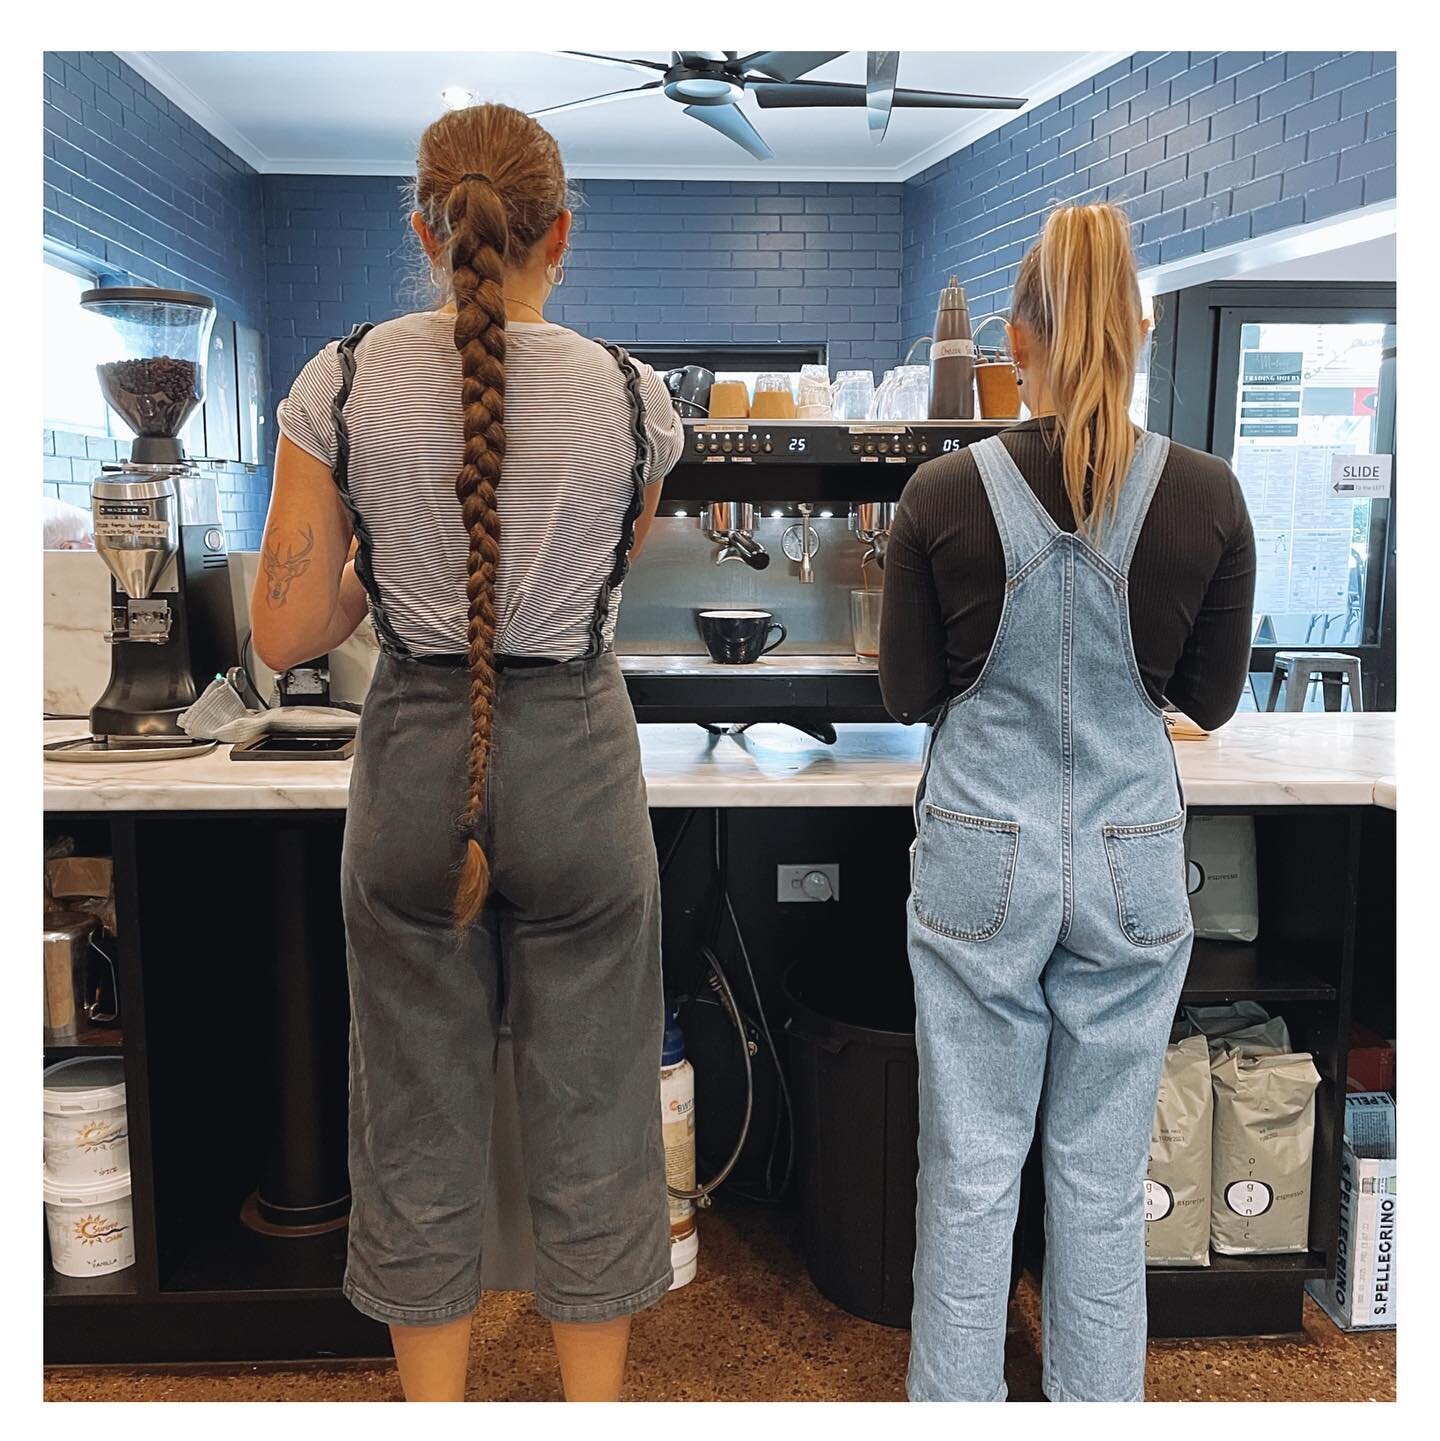 Is it really work if you get to hang out with your bestie? 💙

Luckily for our friendly team we love what we do &amp; each other creating a fun work environment 🥳

Be sure to pop in &amp; say hi 👋🏼

Available dine in &amp; takeaway
Book a table no